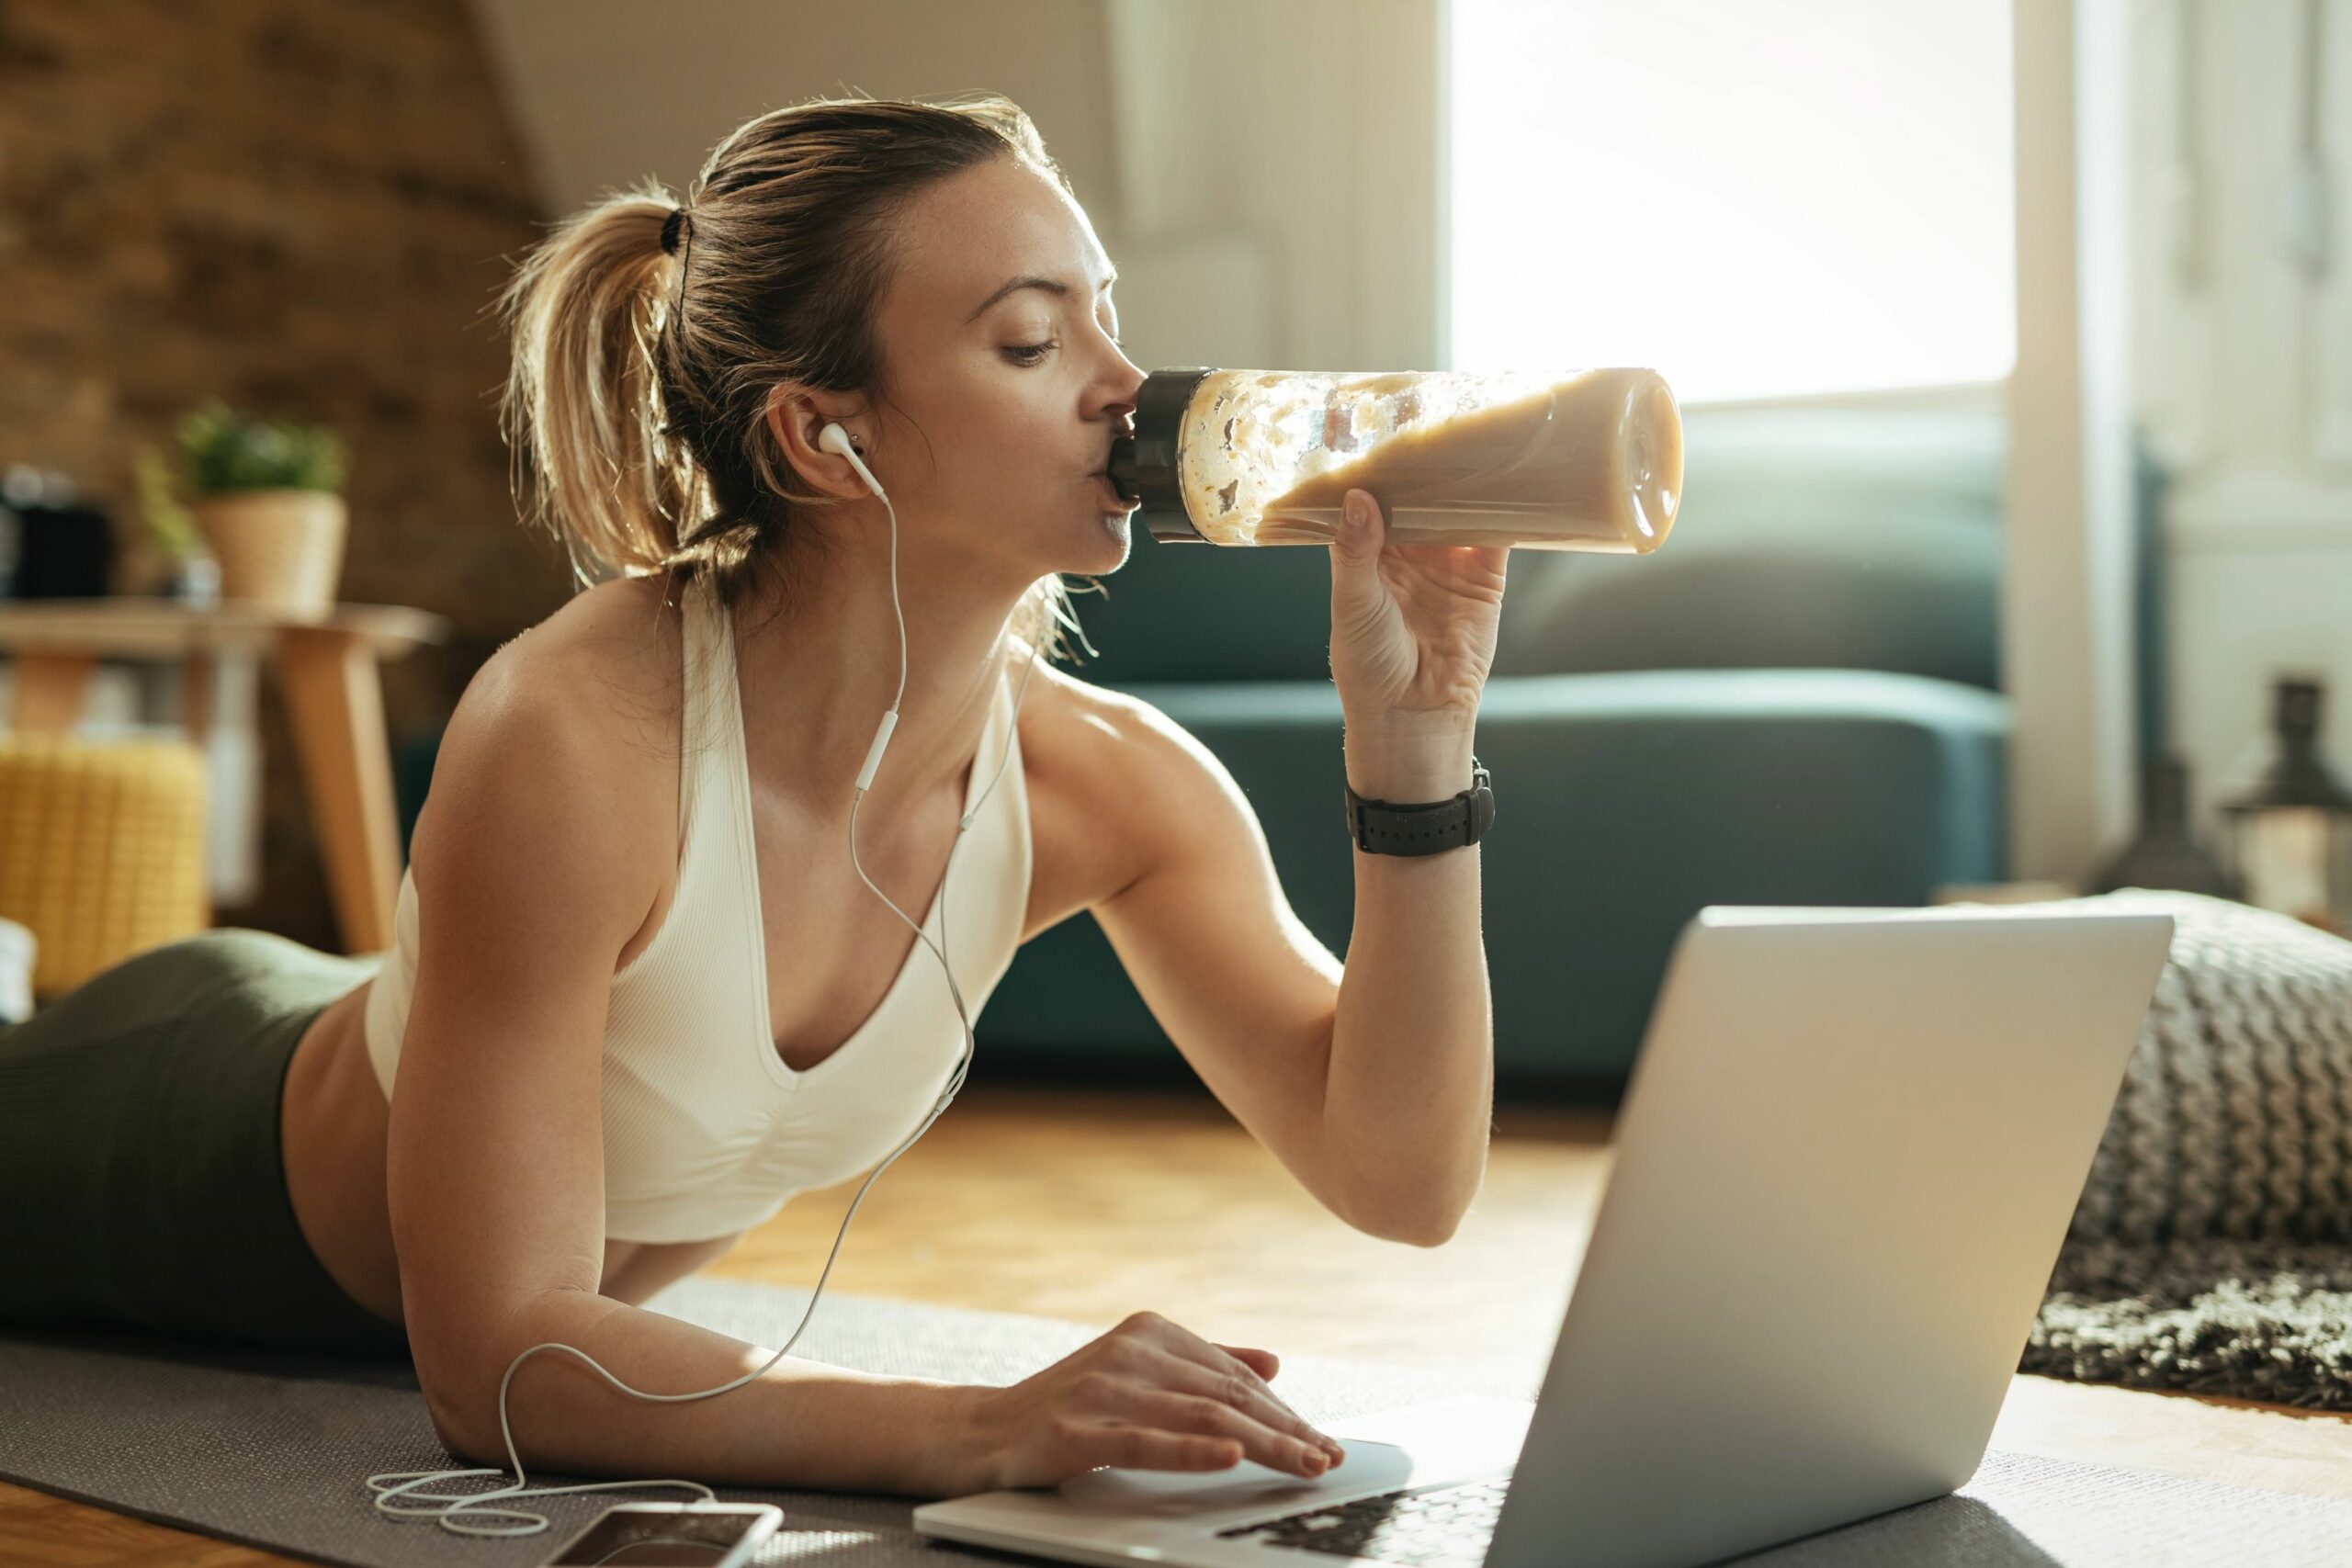 Can Meal Replacement Shakes Help You Lose Weight?